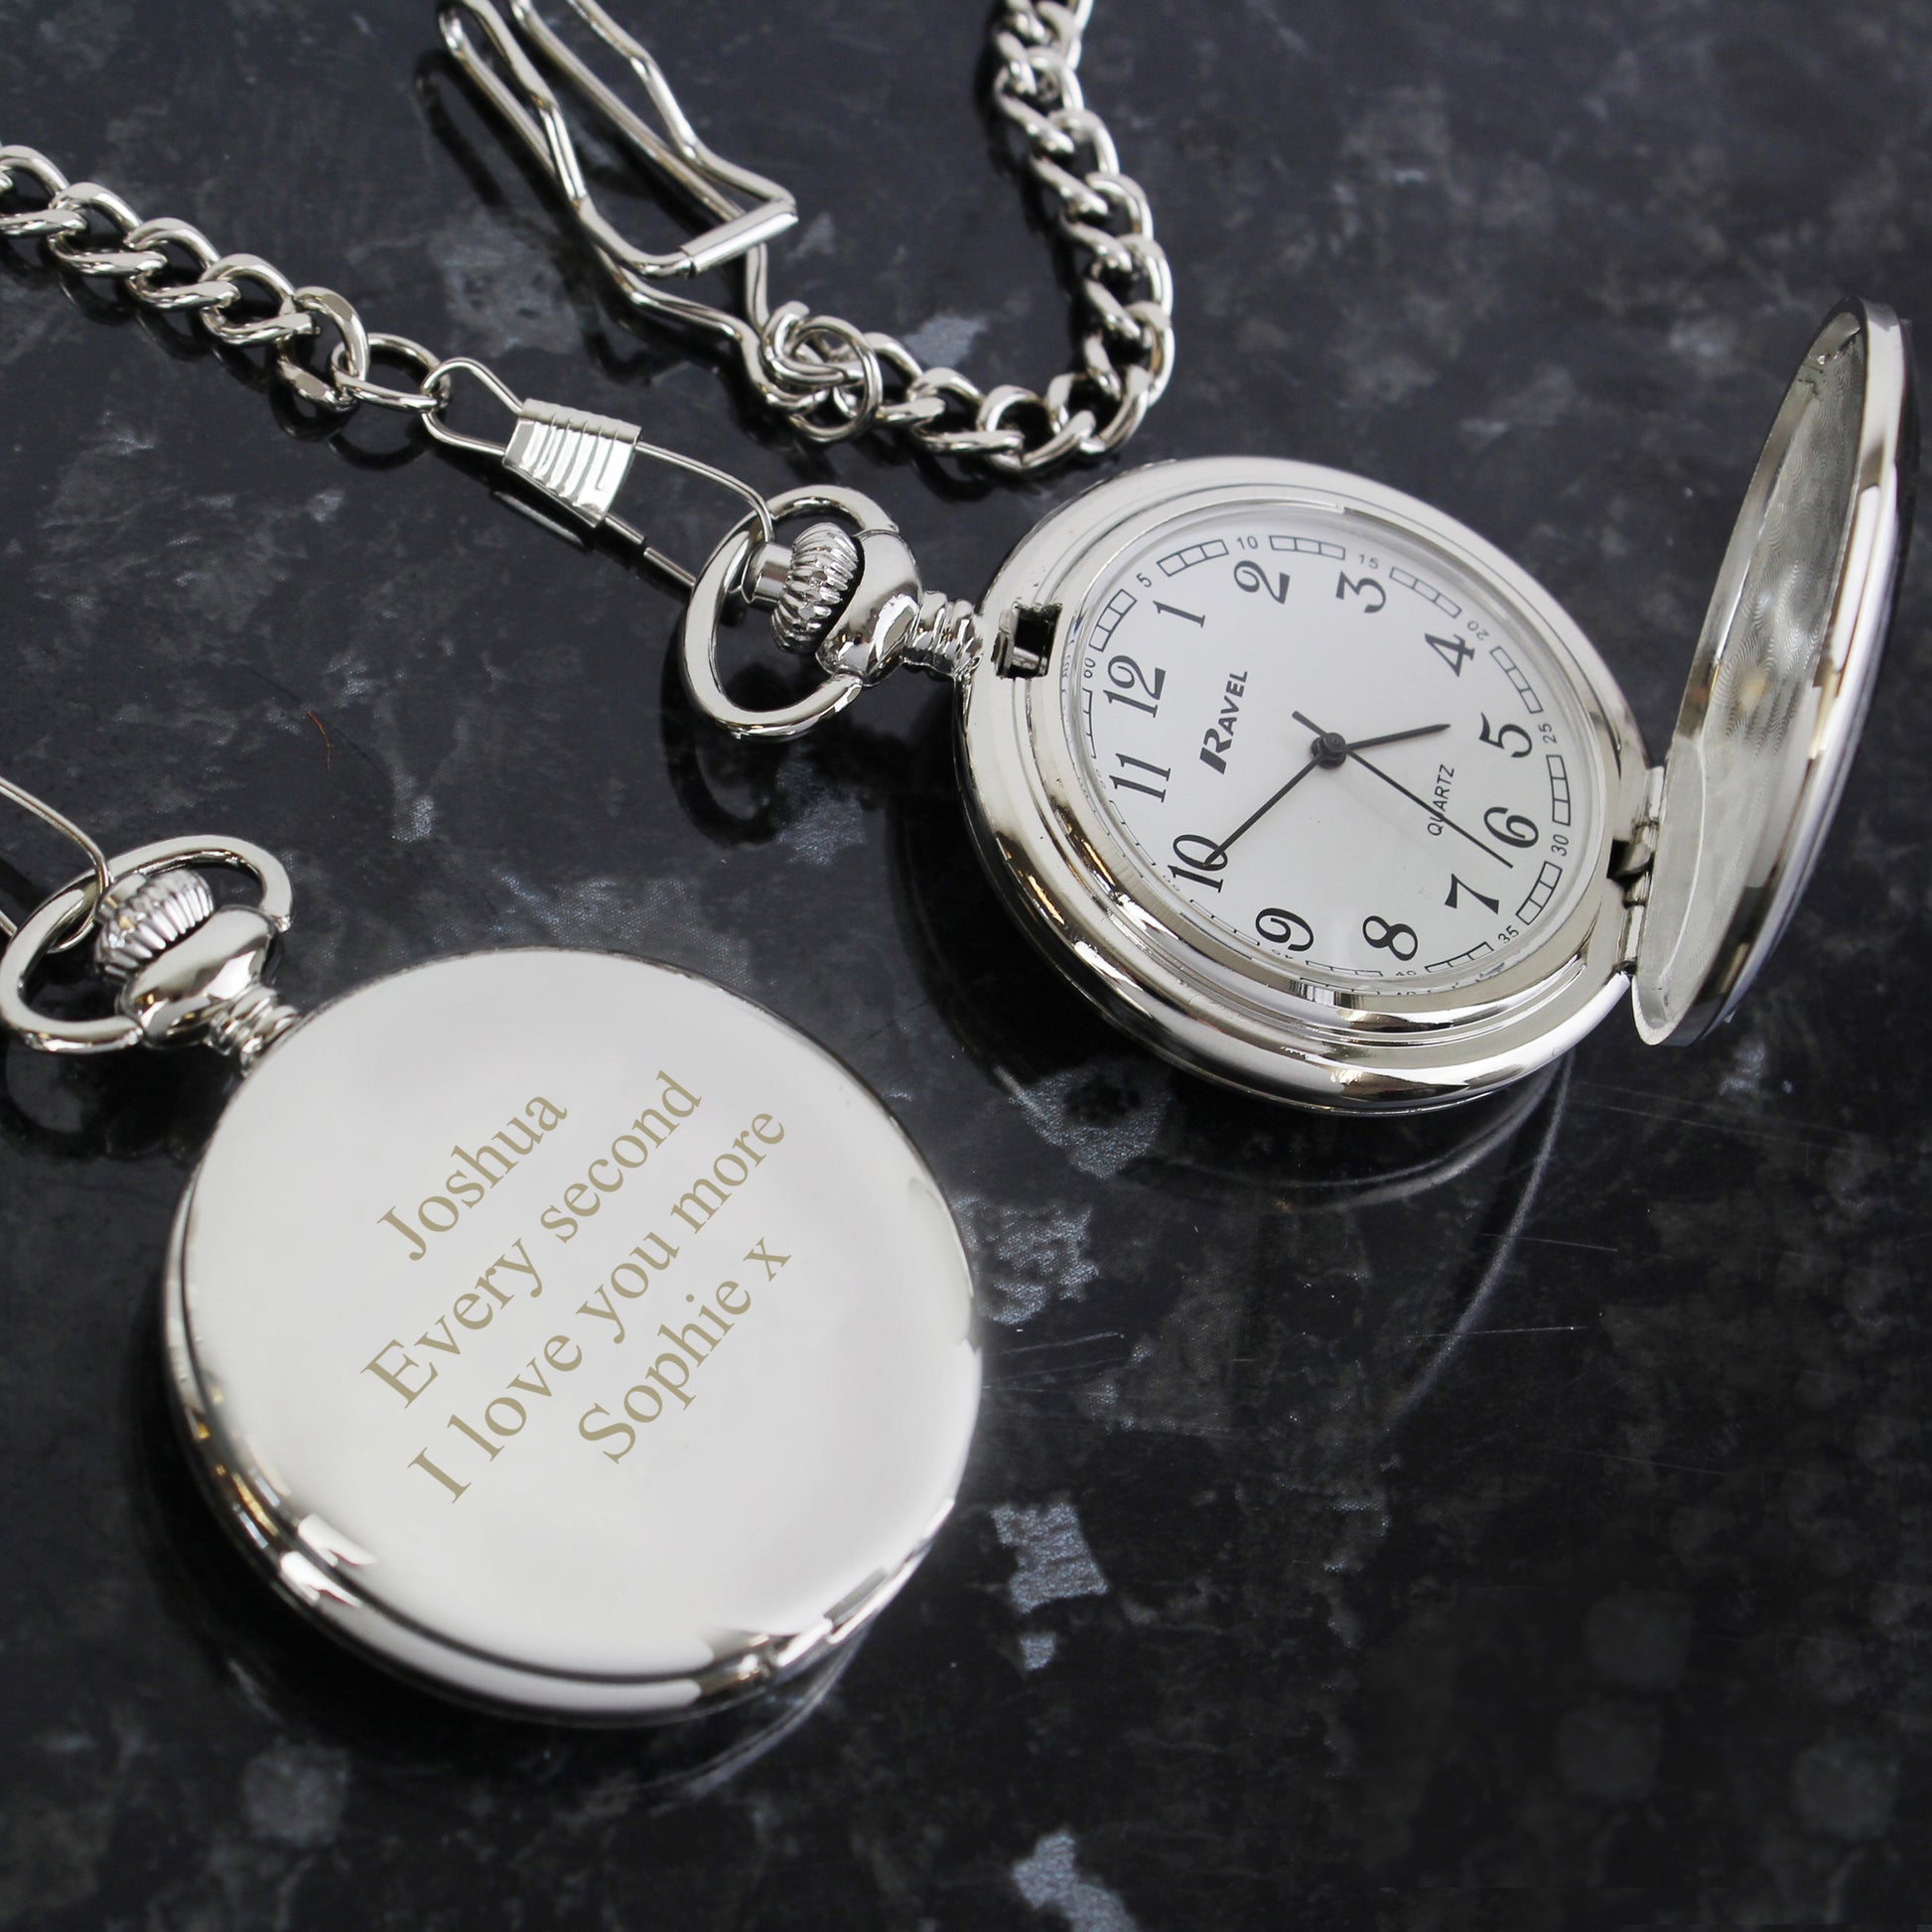 Chrome plated pocket watch engraved with up to four lines of text, showing interior of watch also